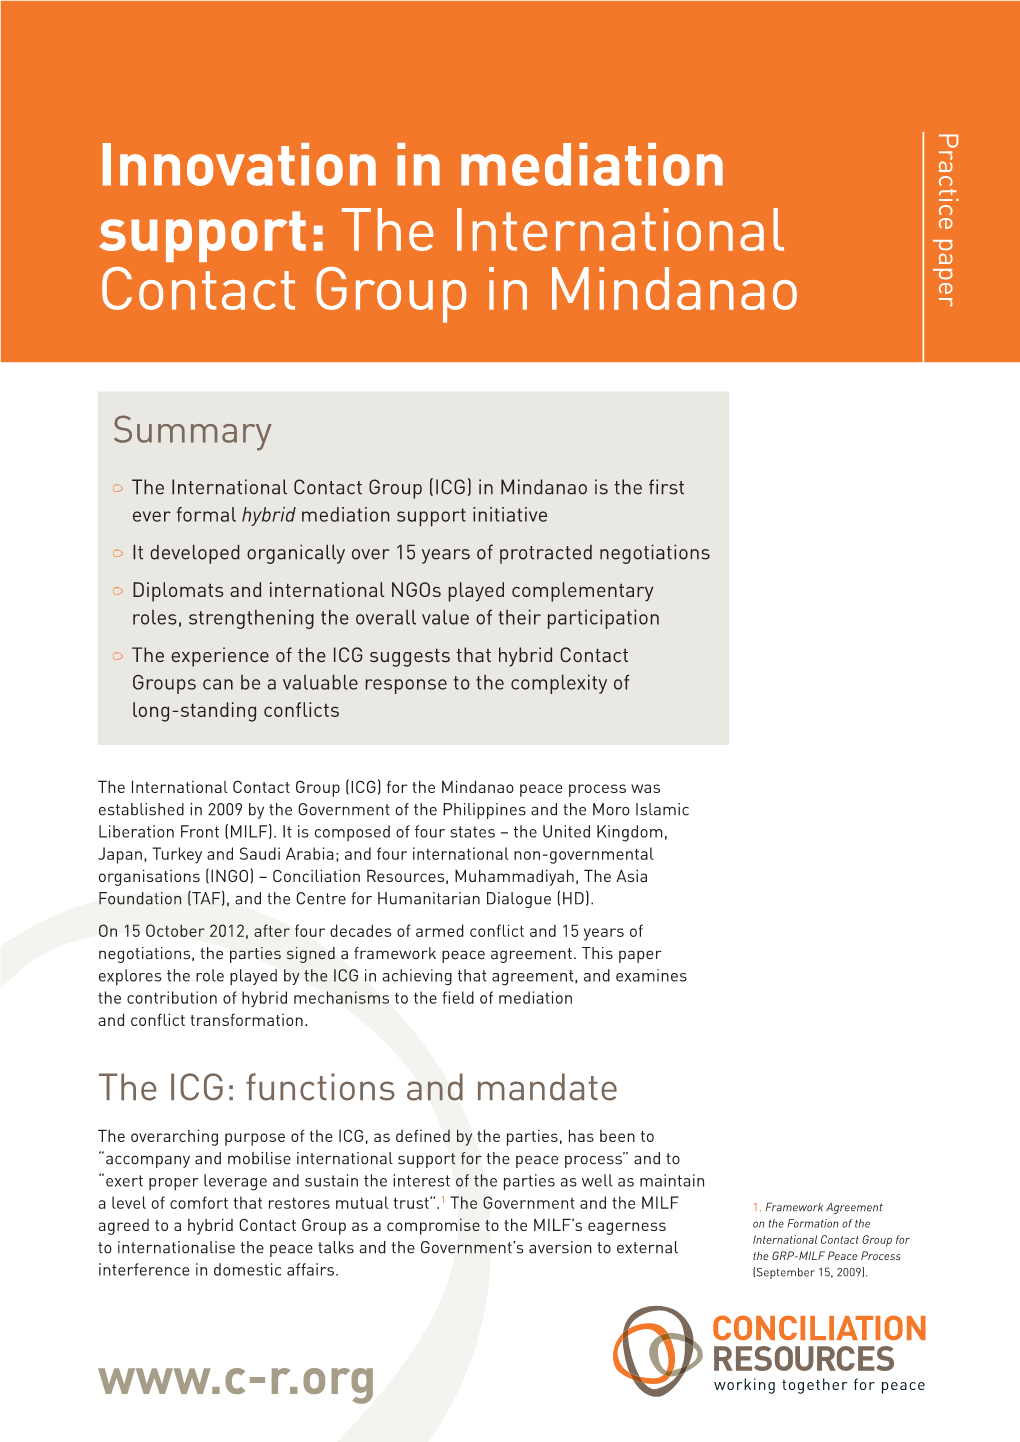 The International Contact Group in Mindanao